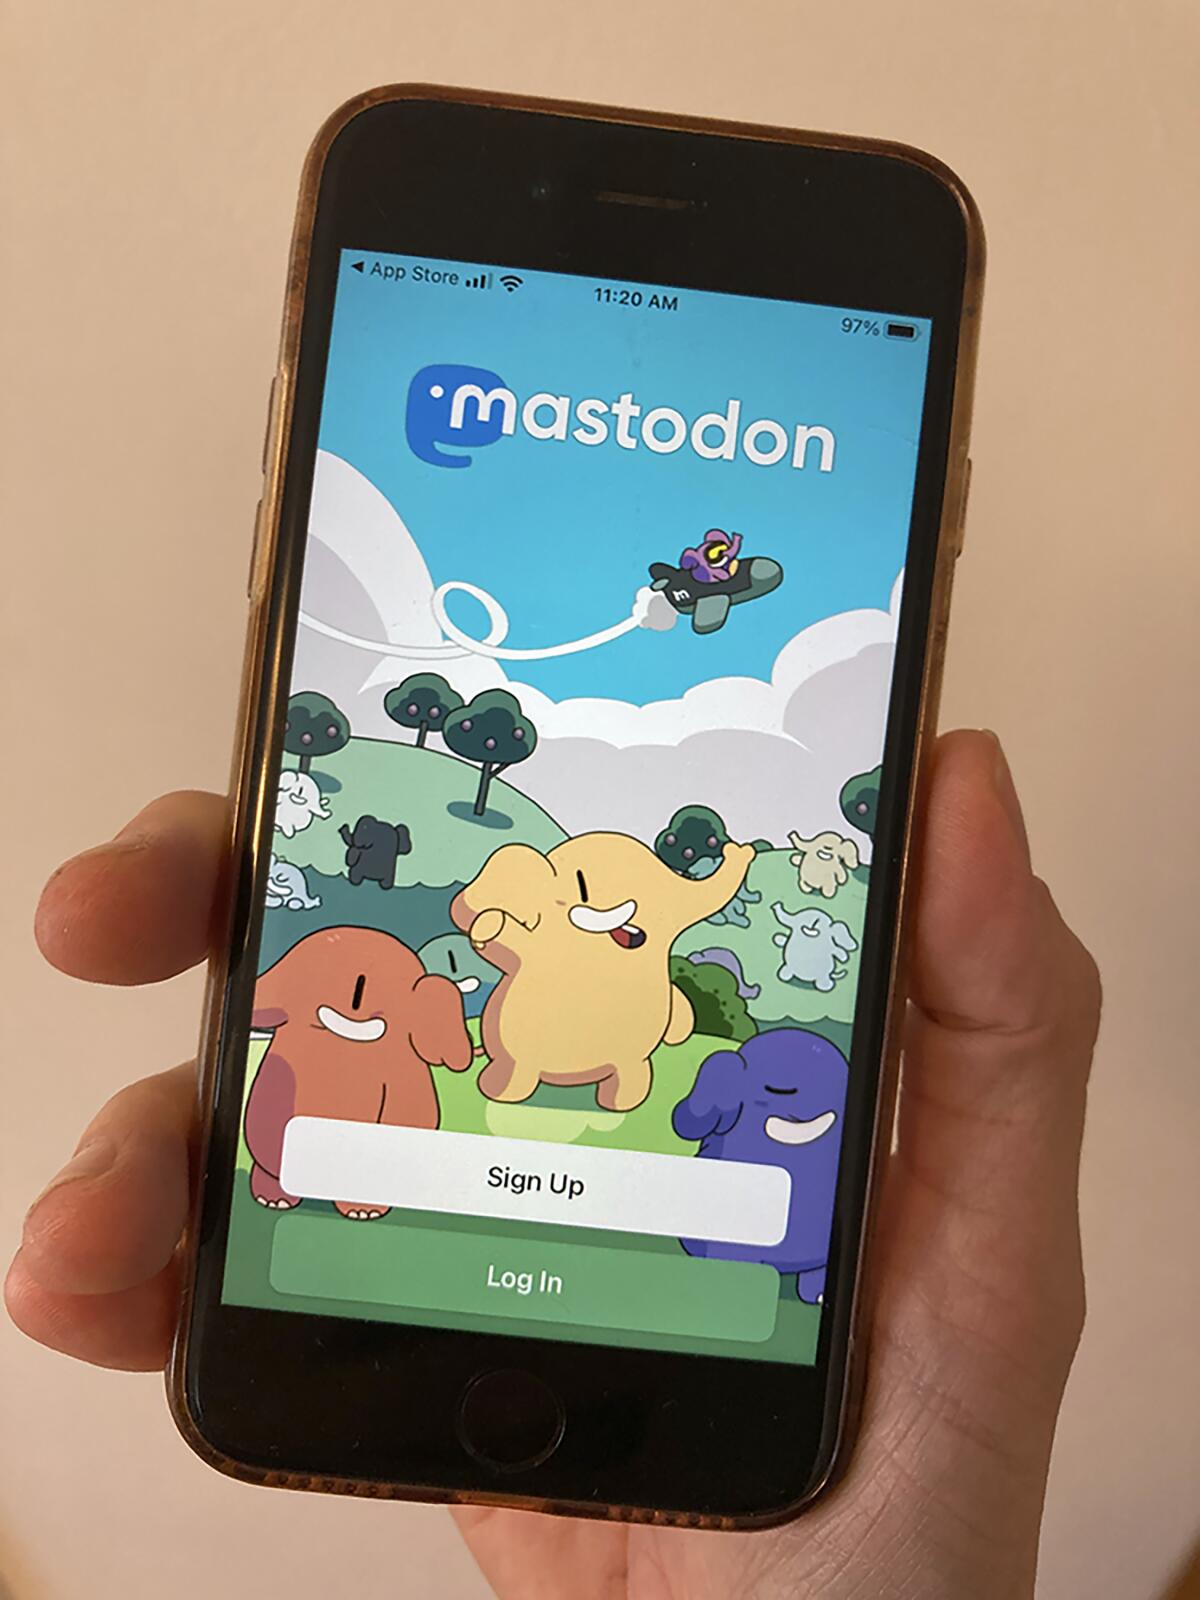 The Mastodon site is shown on a smart phone in Oakland, Calif., on Friday, Nov. 11, 2022. Sites like Mastodon and even Tumblr are emerging as new (or renewed) alternatives to Twitter. (AP Photo/Barbara Ortutay)